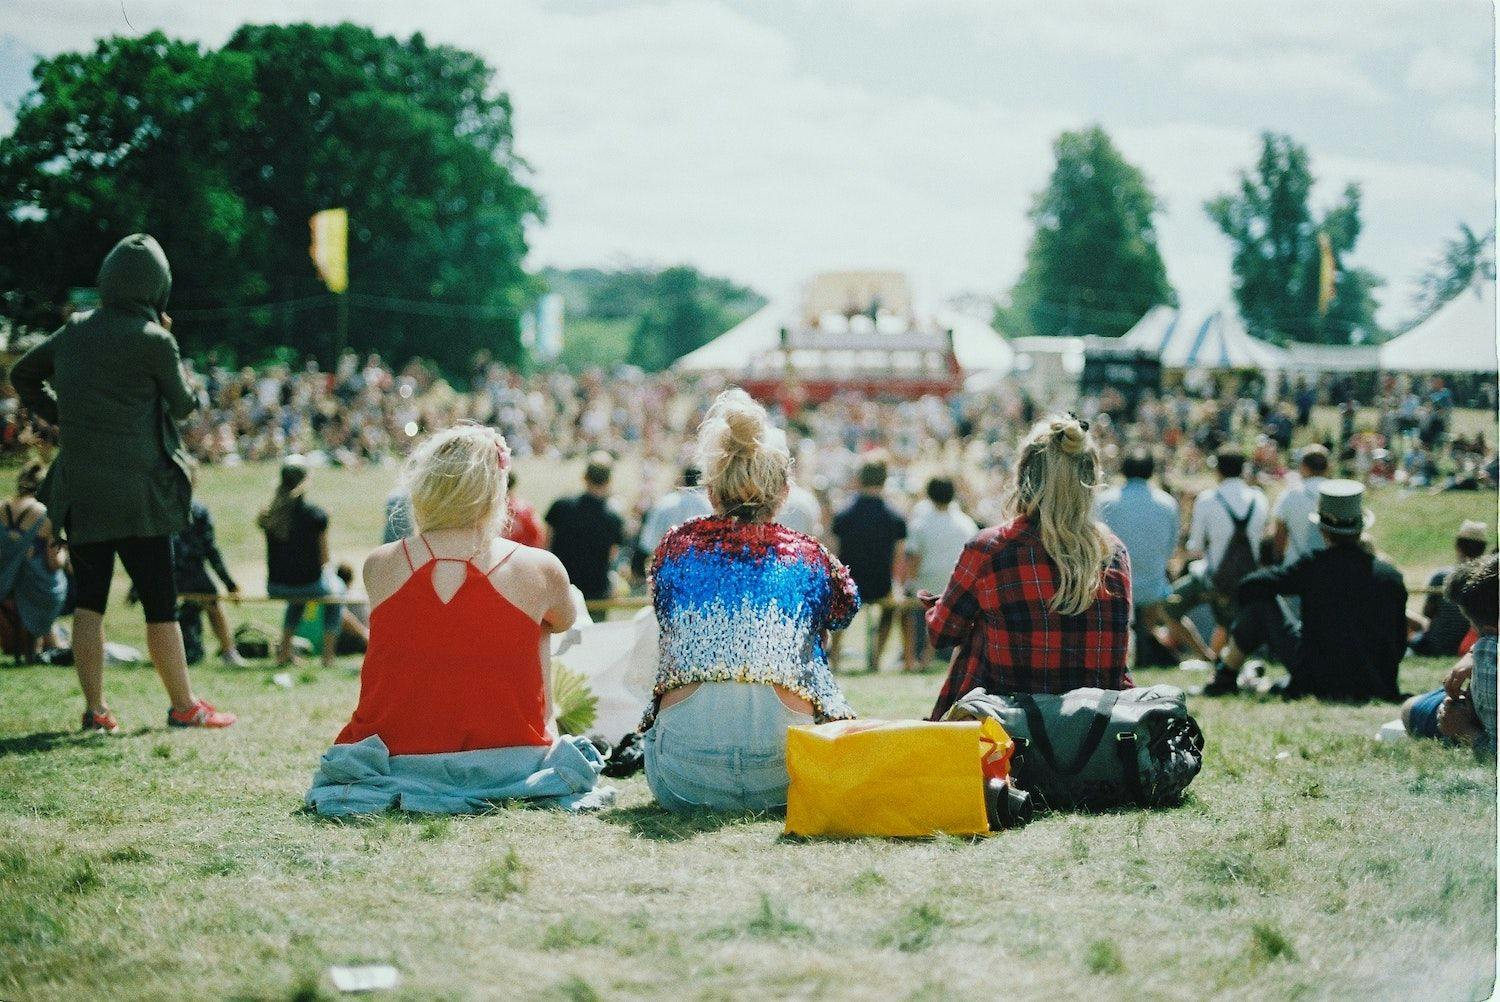 UK music festivals commit to tackling sexual violence